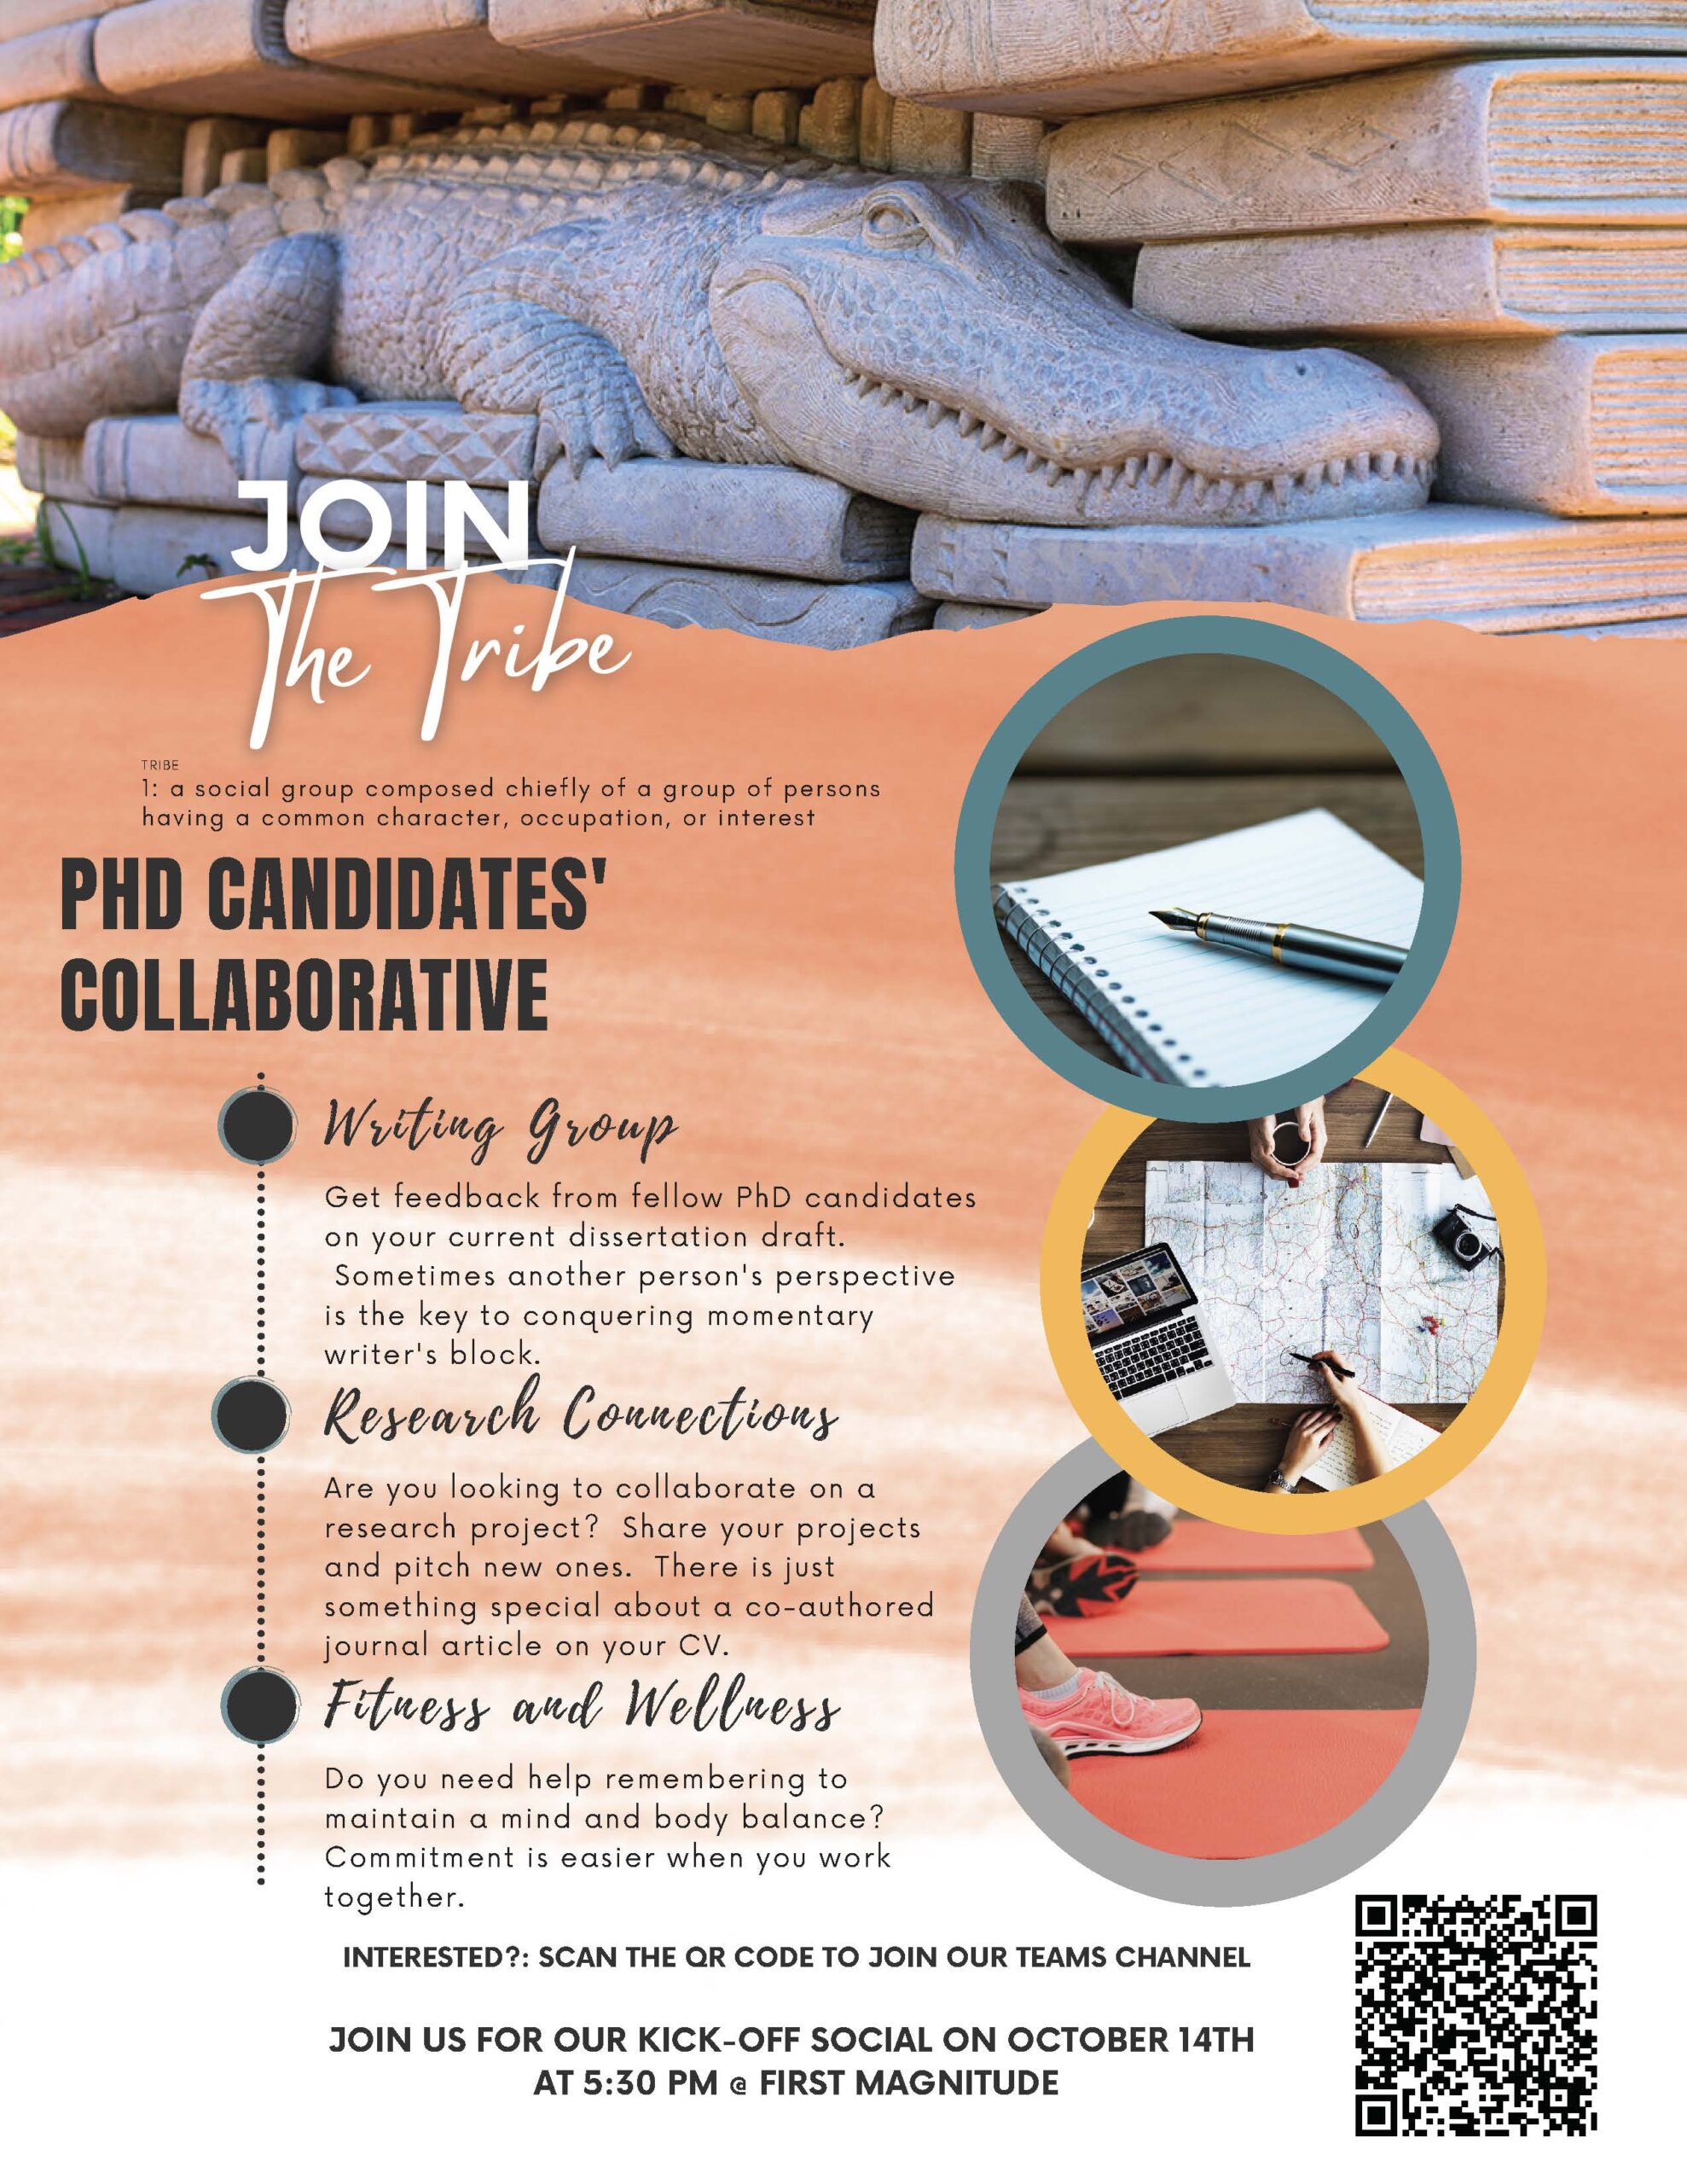 A flyer for the PhD Candidates' Collaborative. The flyer has a QR code on the bottom-right corner for joining the Teams channel.